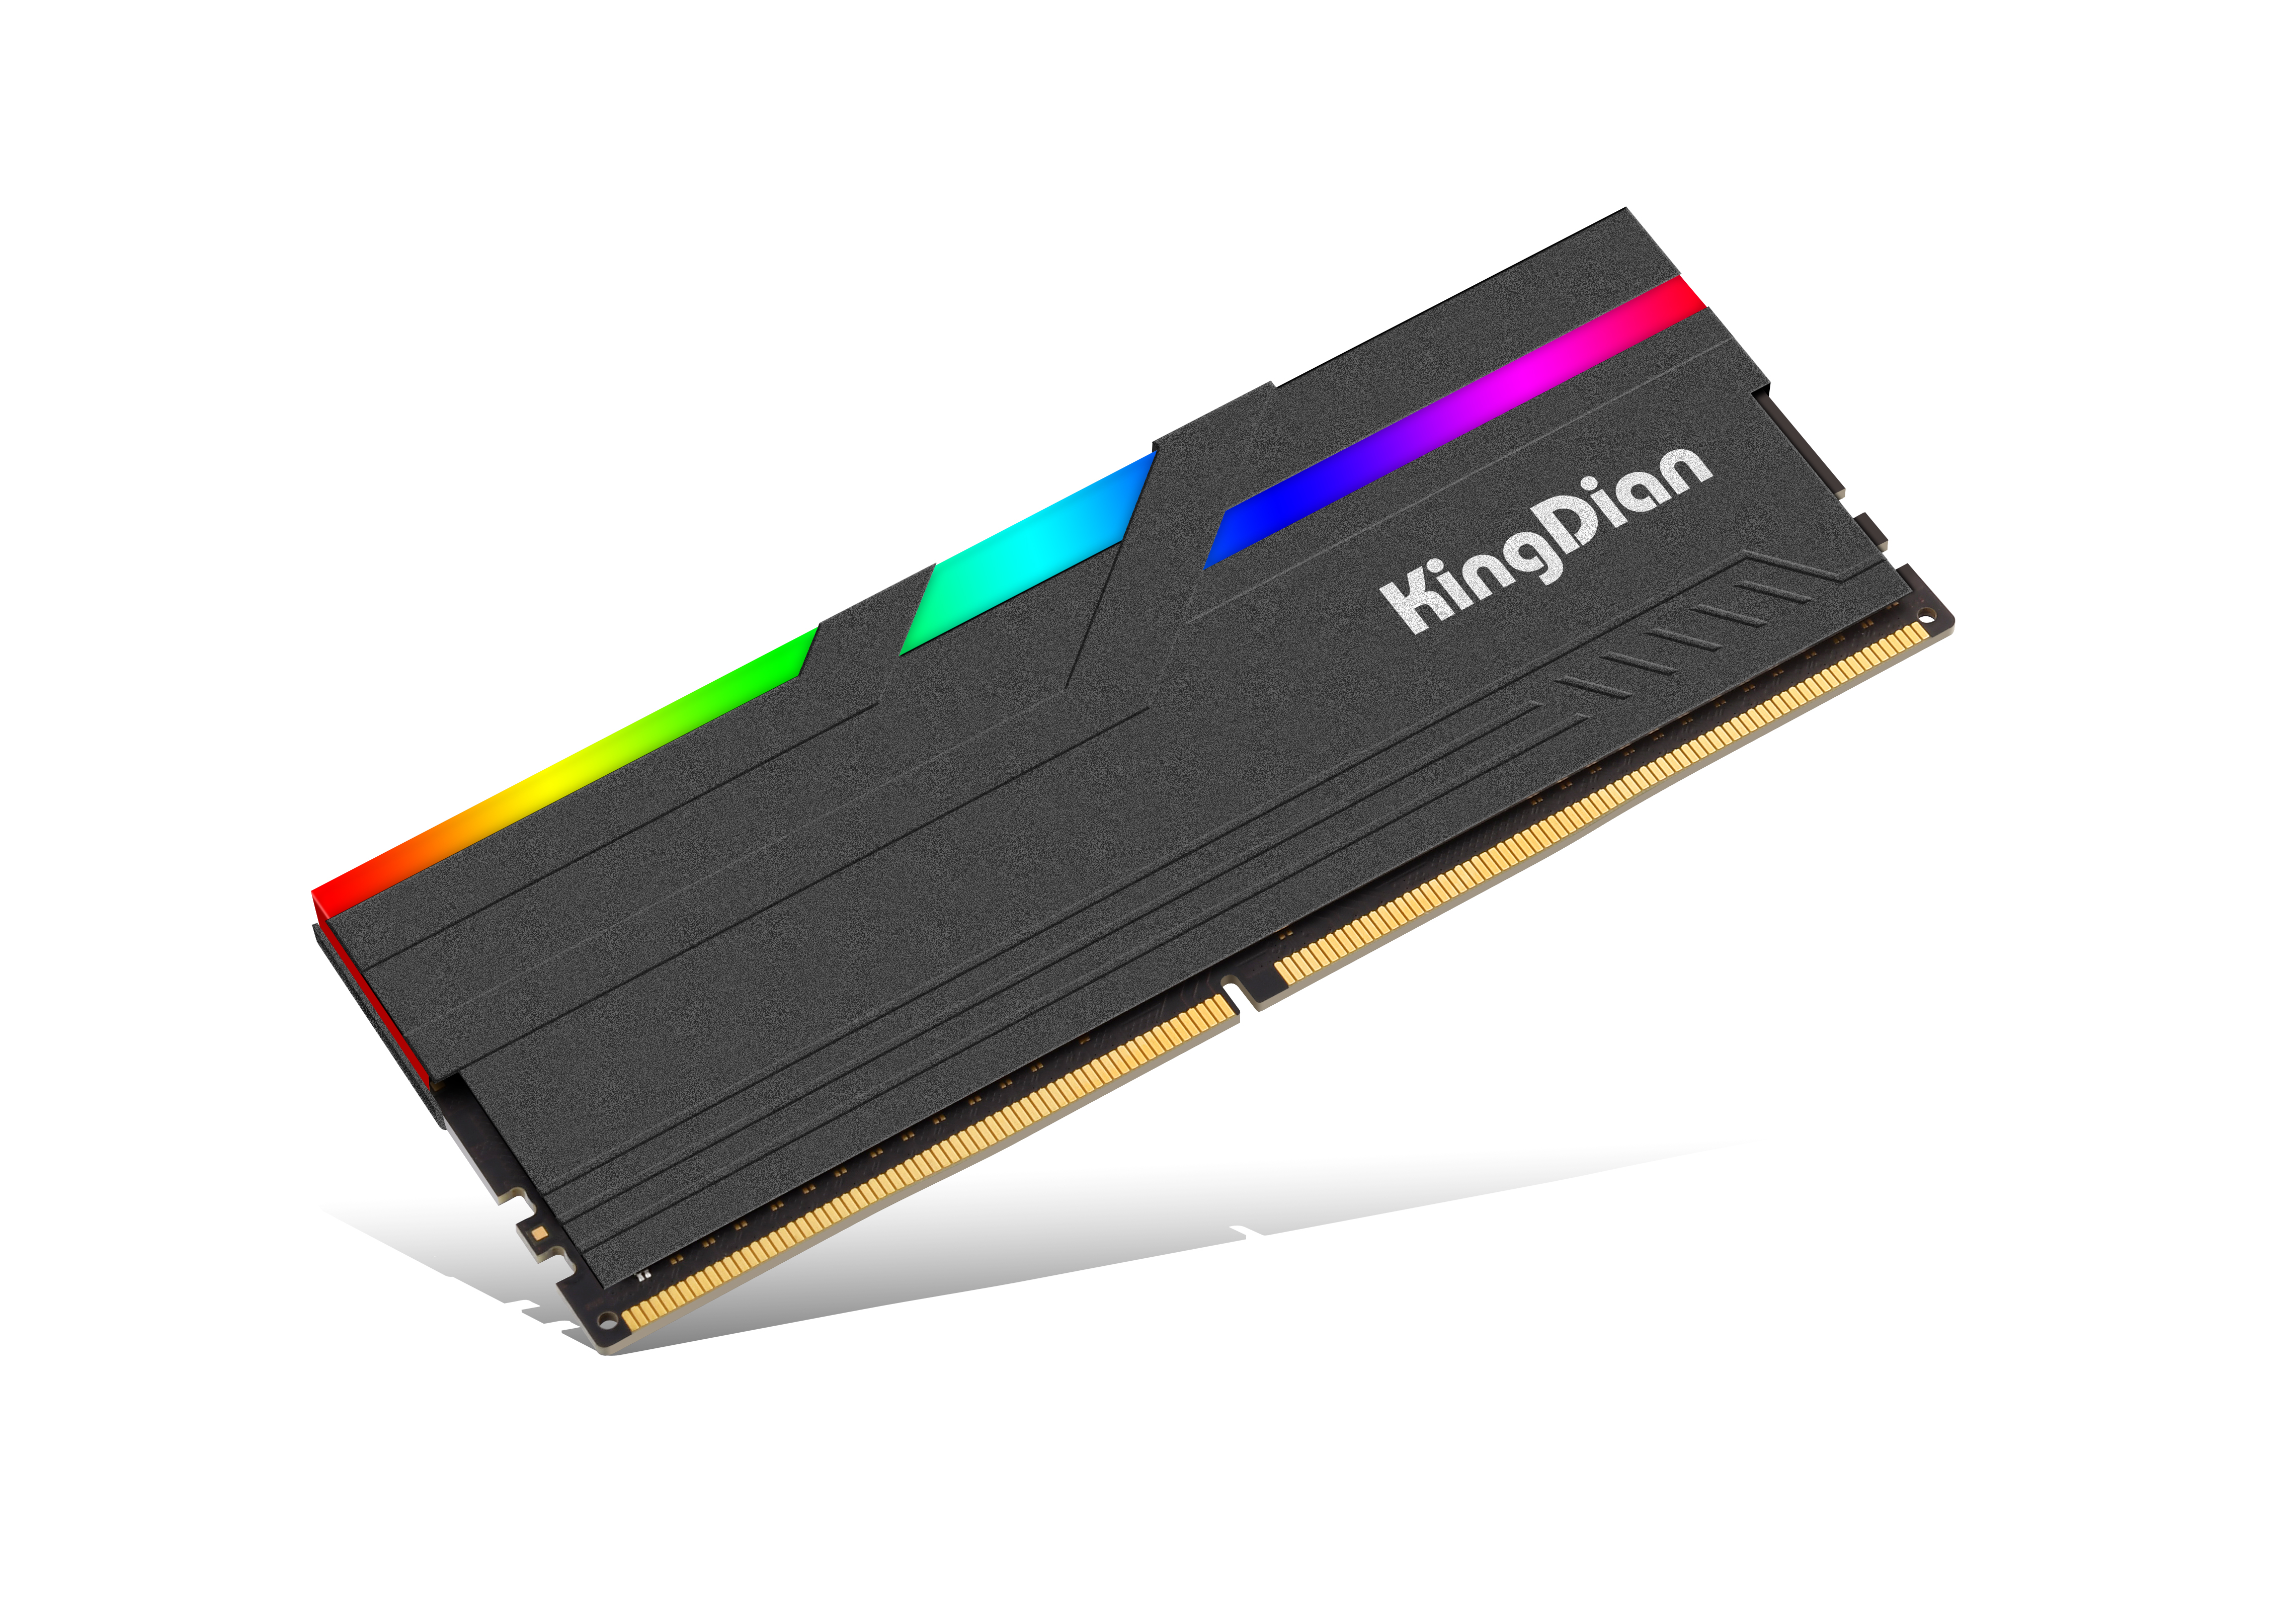 Enhance your system's performance with KingDian DDR4 UDIMM RGB Series RH41.